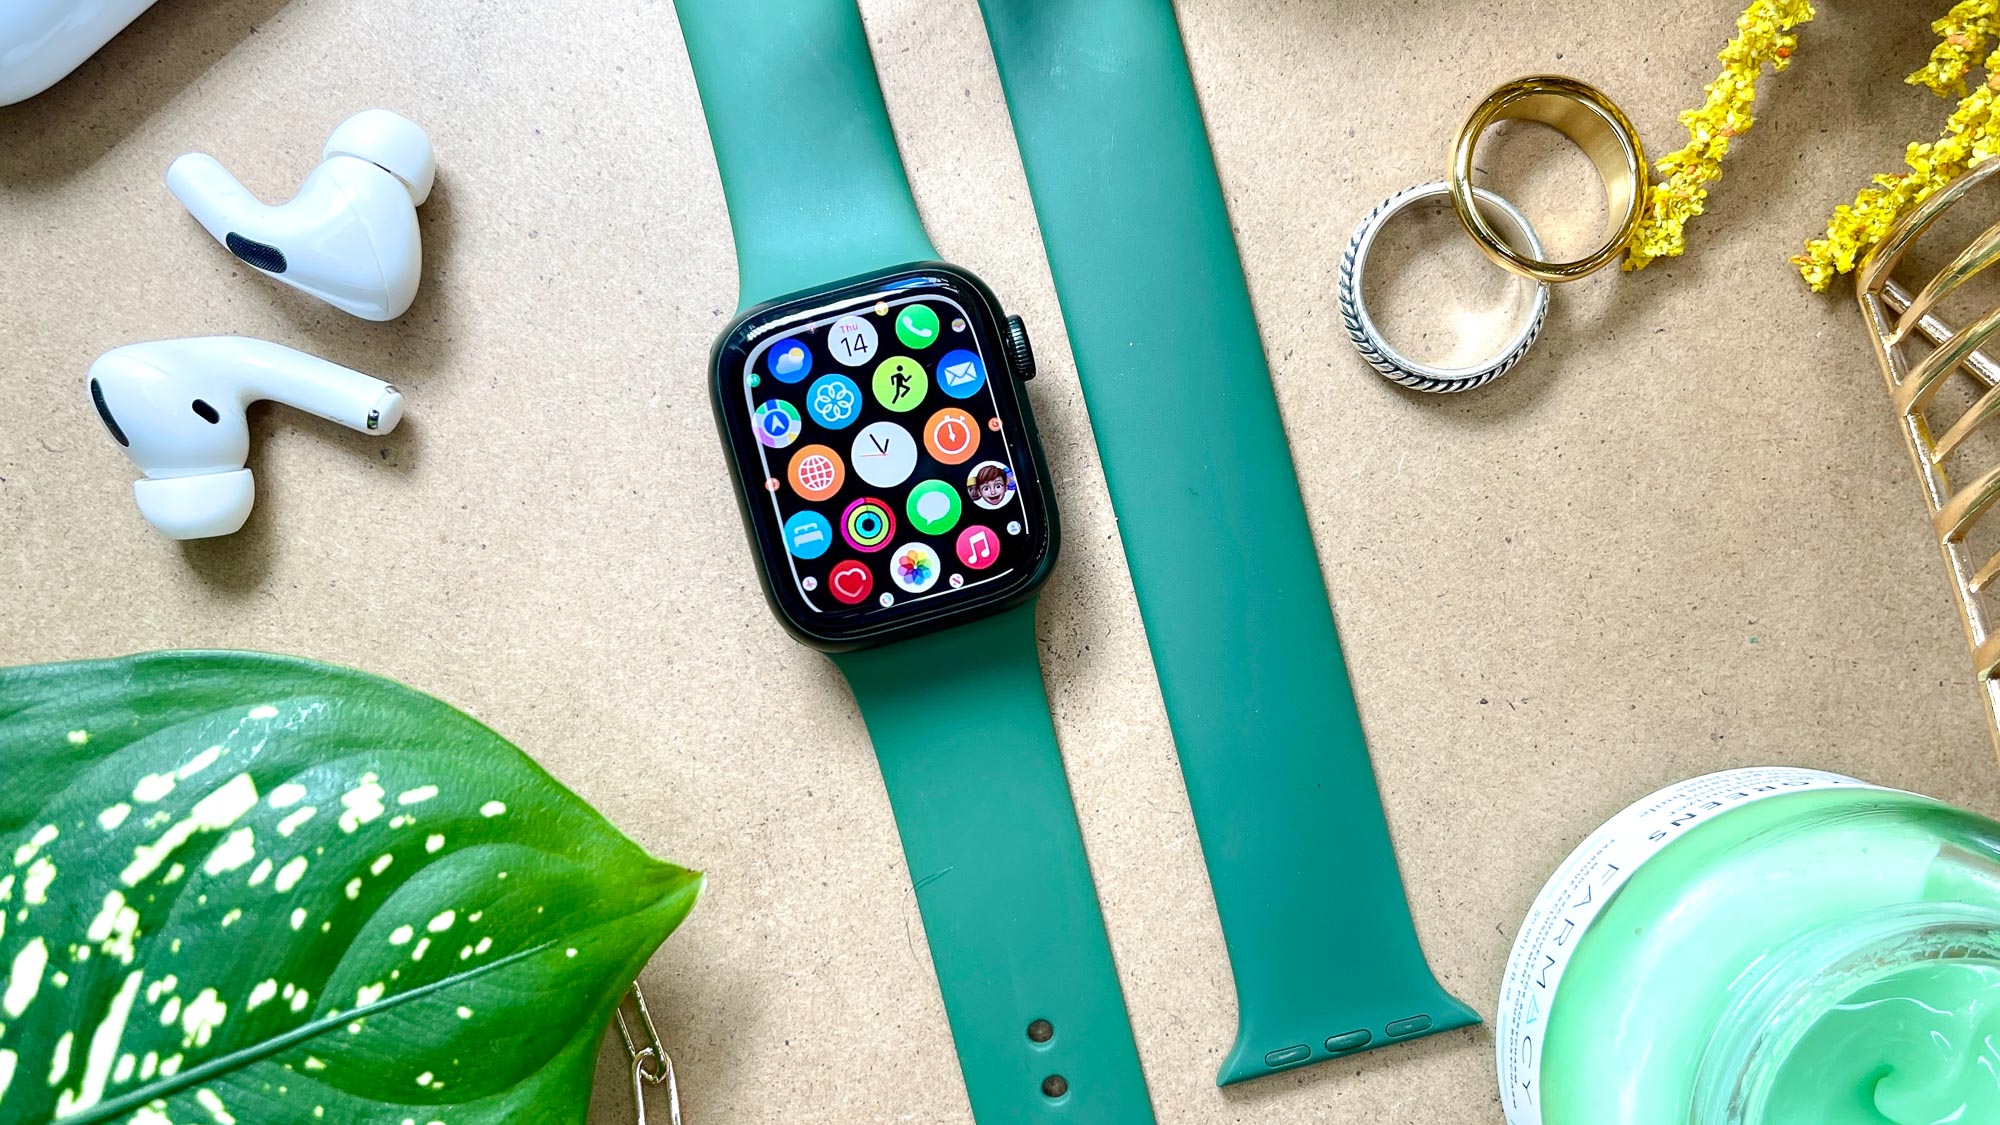 Apple Watch discounts in March, up to 40% - 1